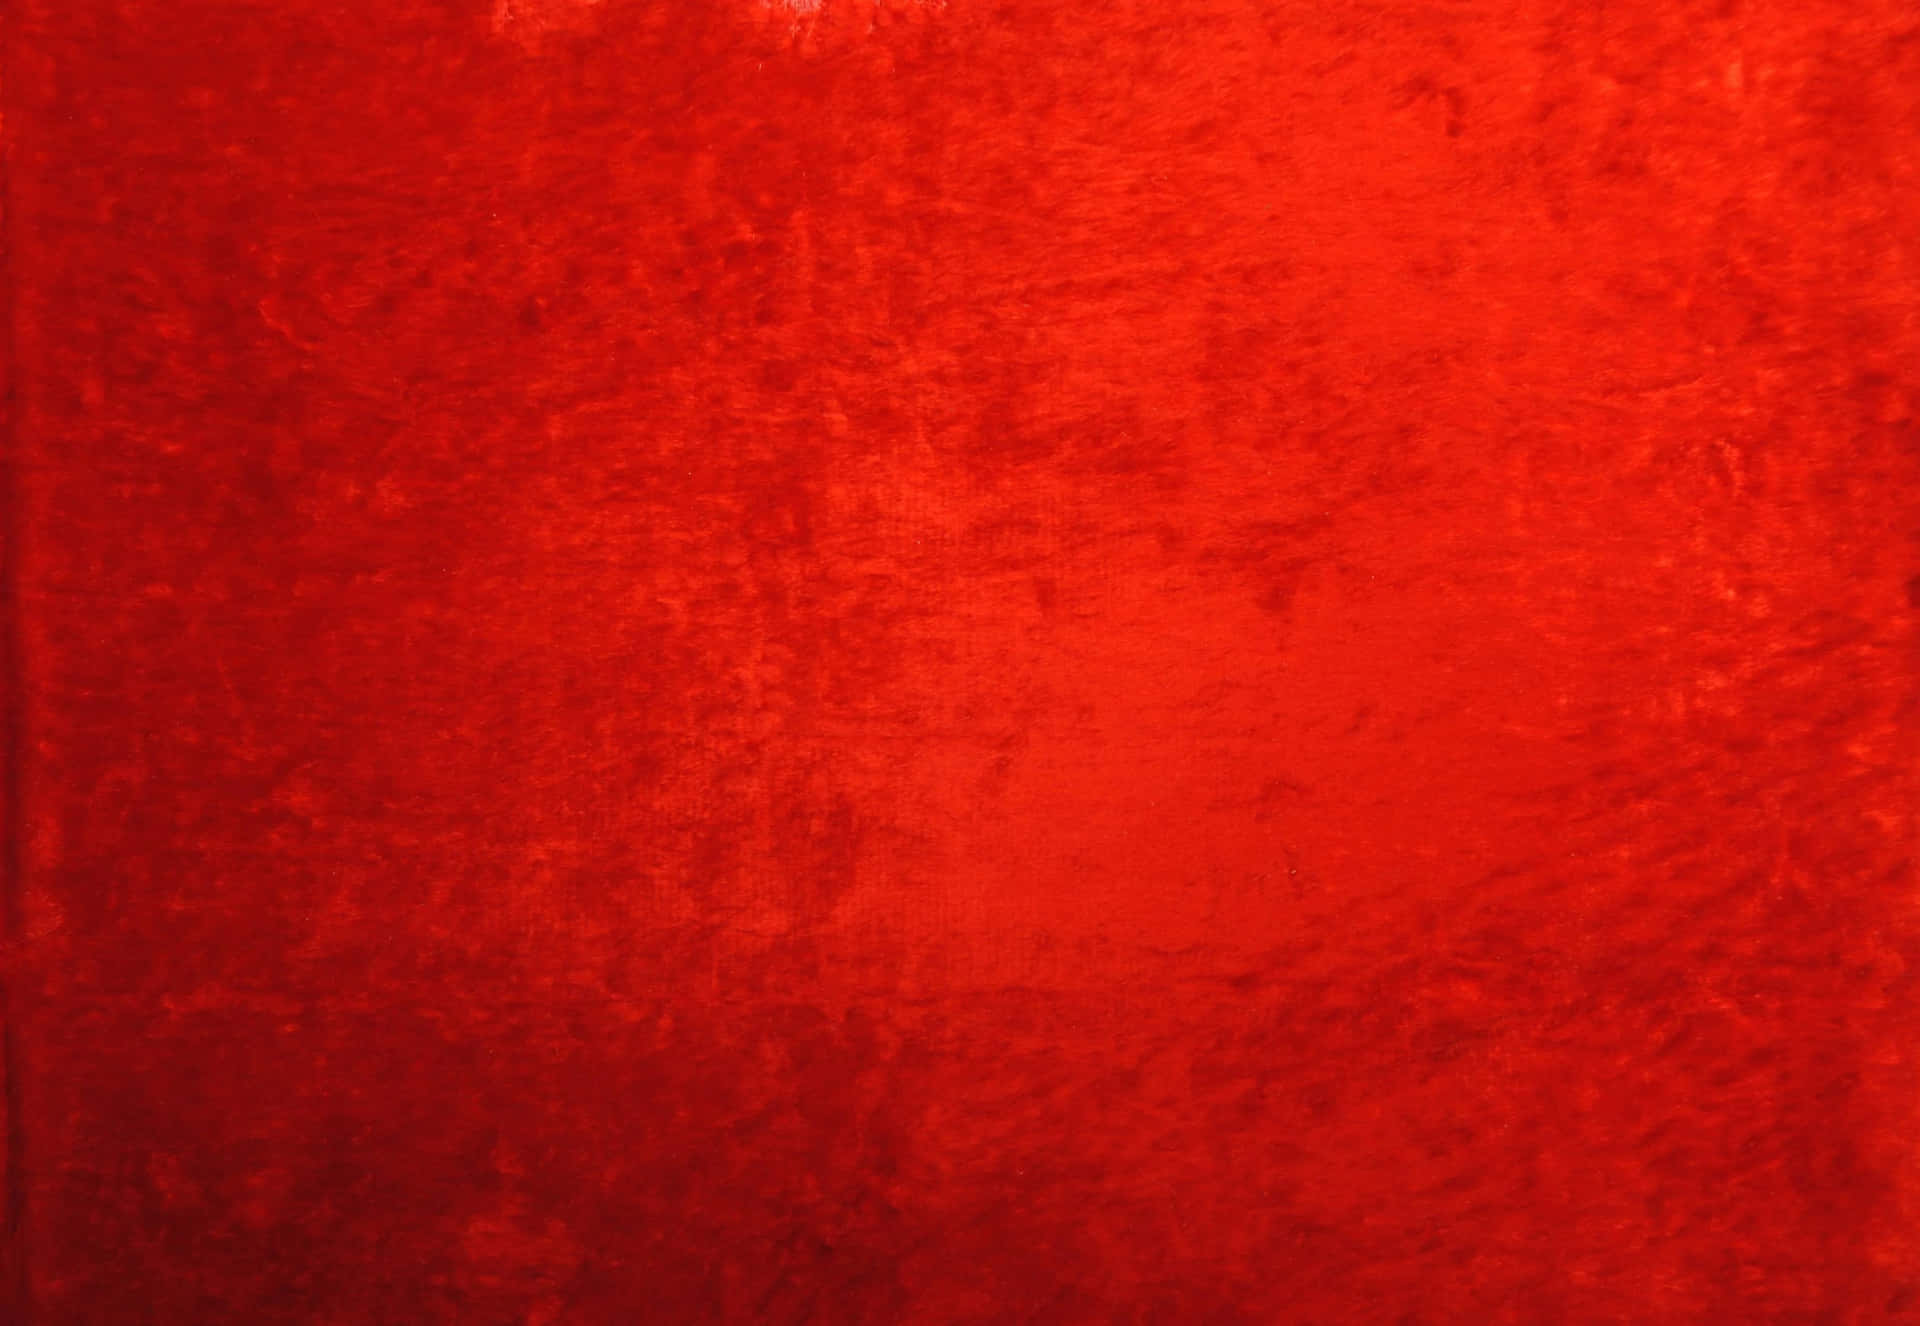 A vibrant and textured red background